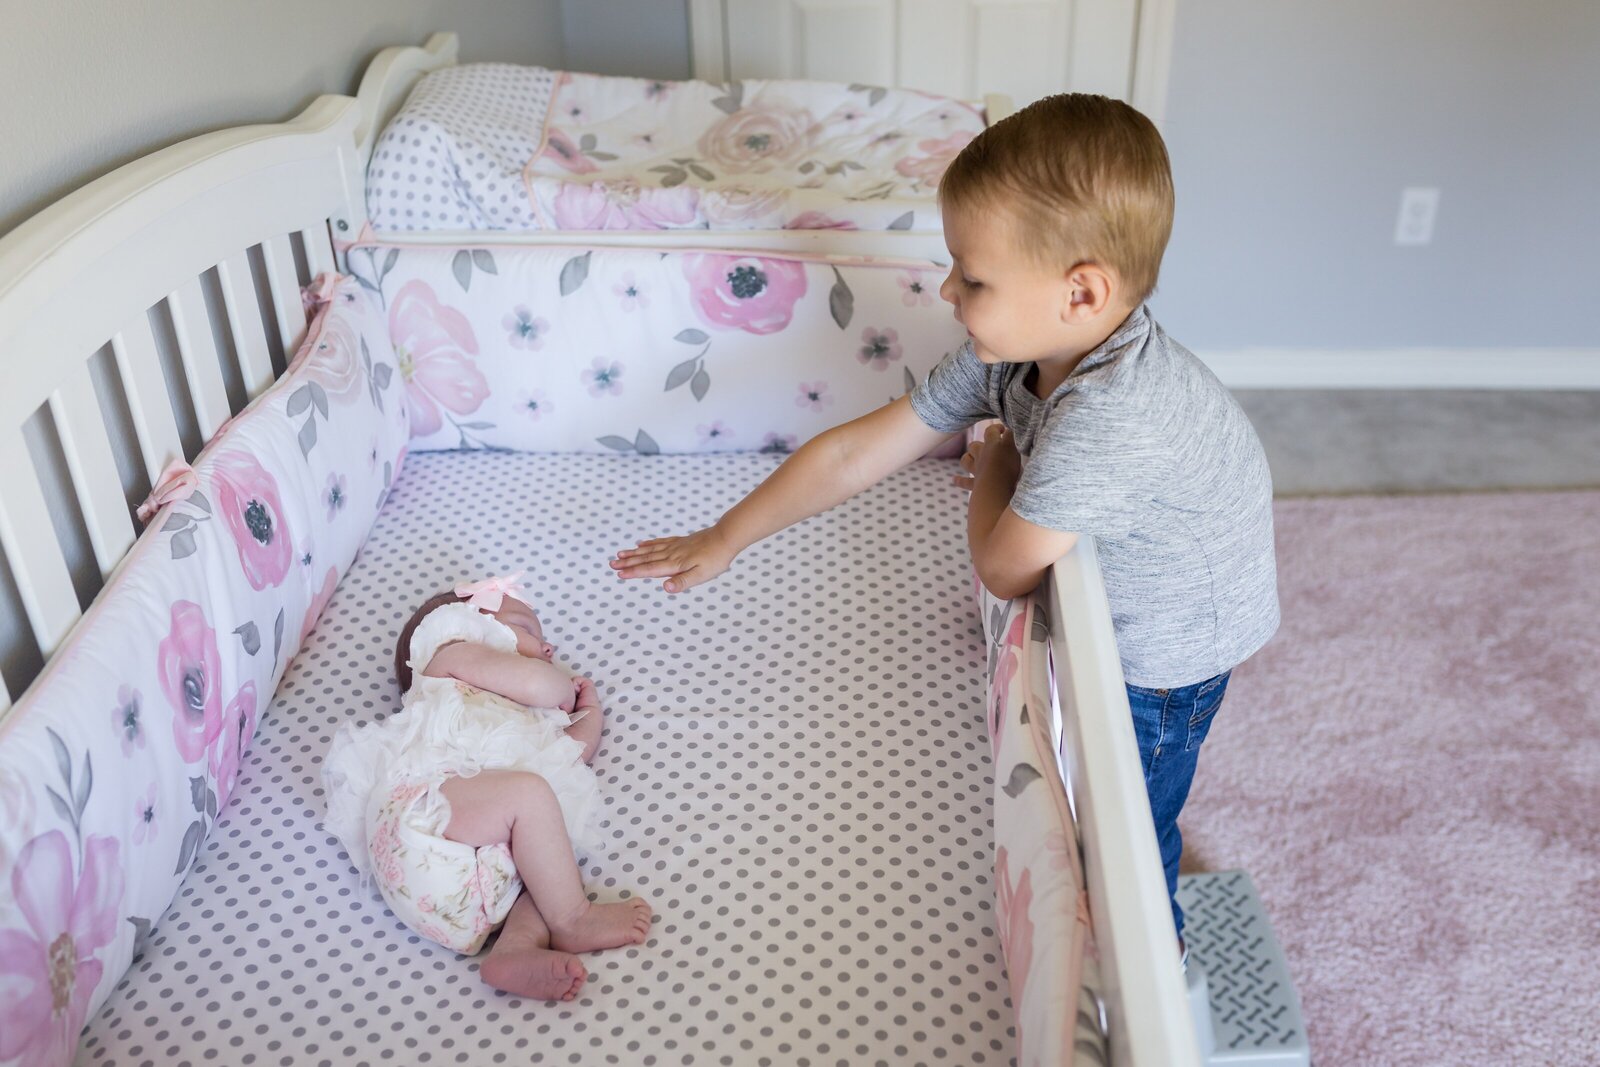 Big brother reaching for newborn sister in crib. In-home family photo session by Jennifer Beal photography.